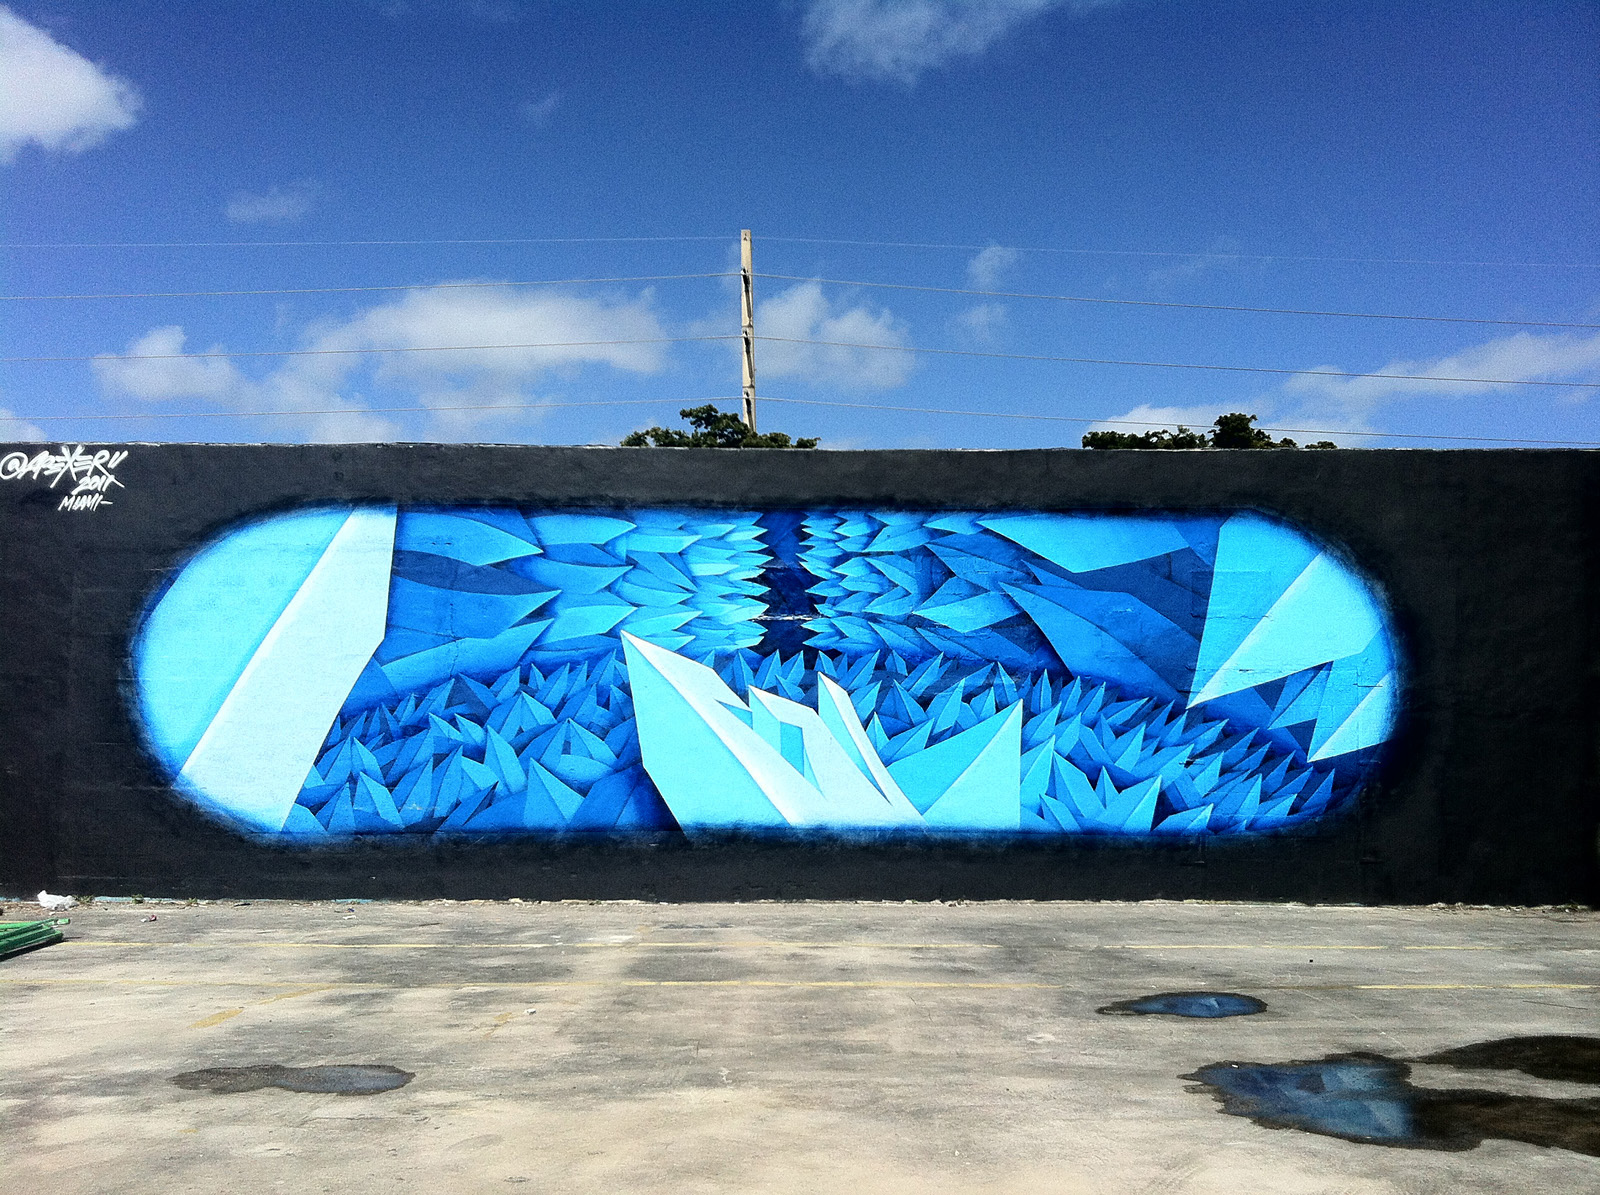 Apexer mural created for the Art Basel event in 2011